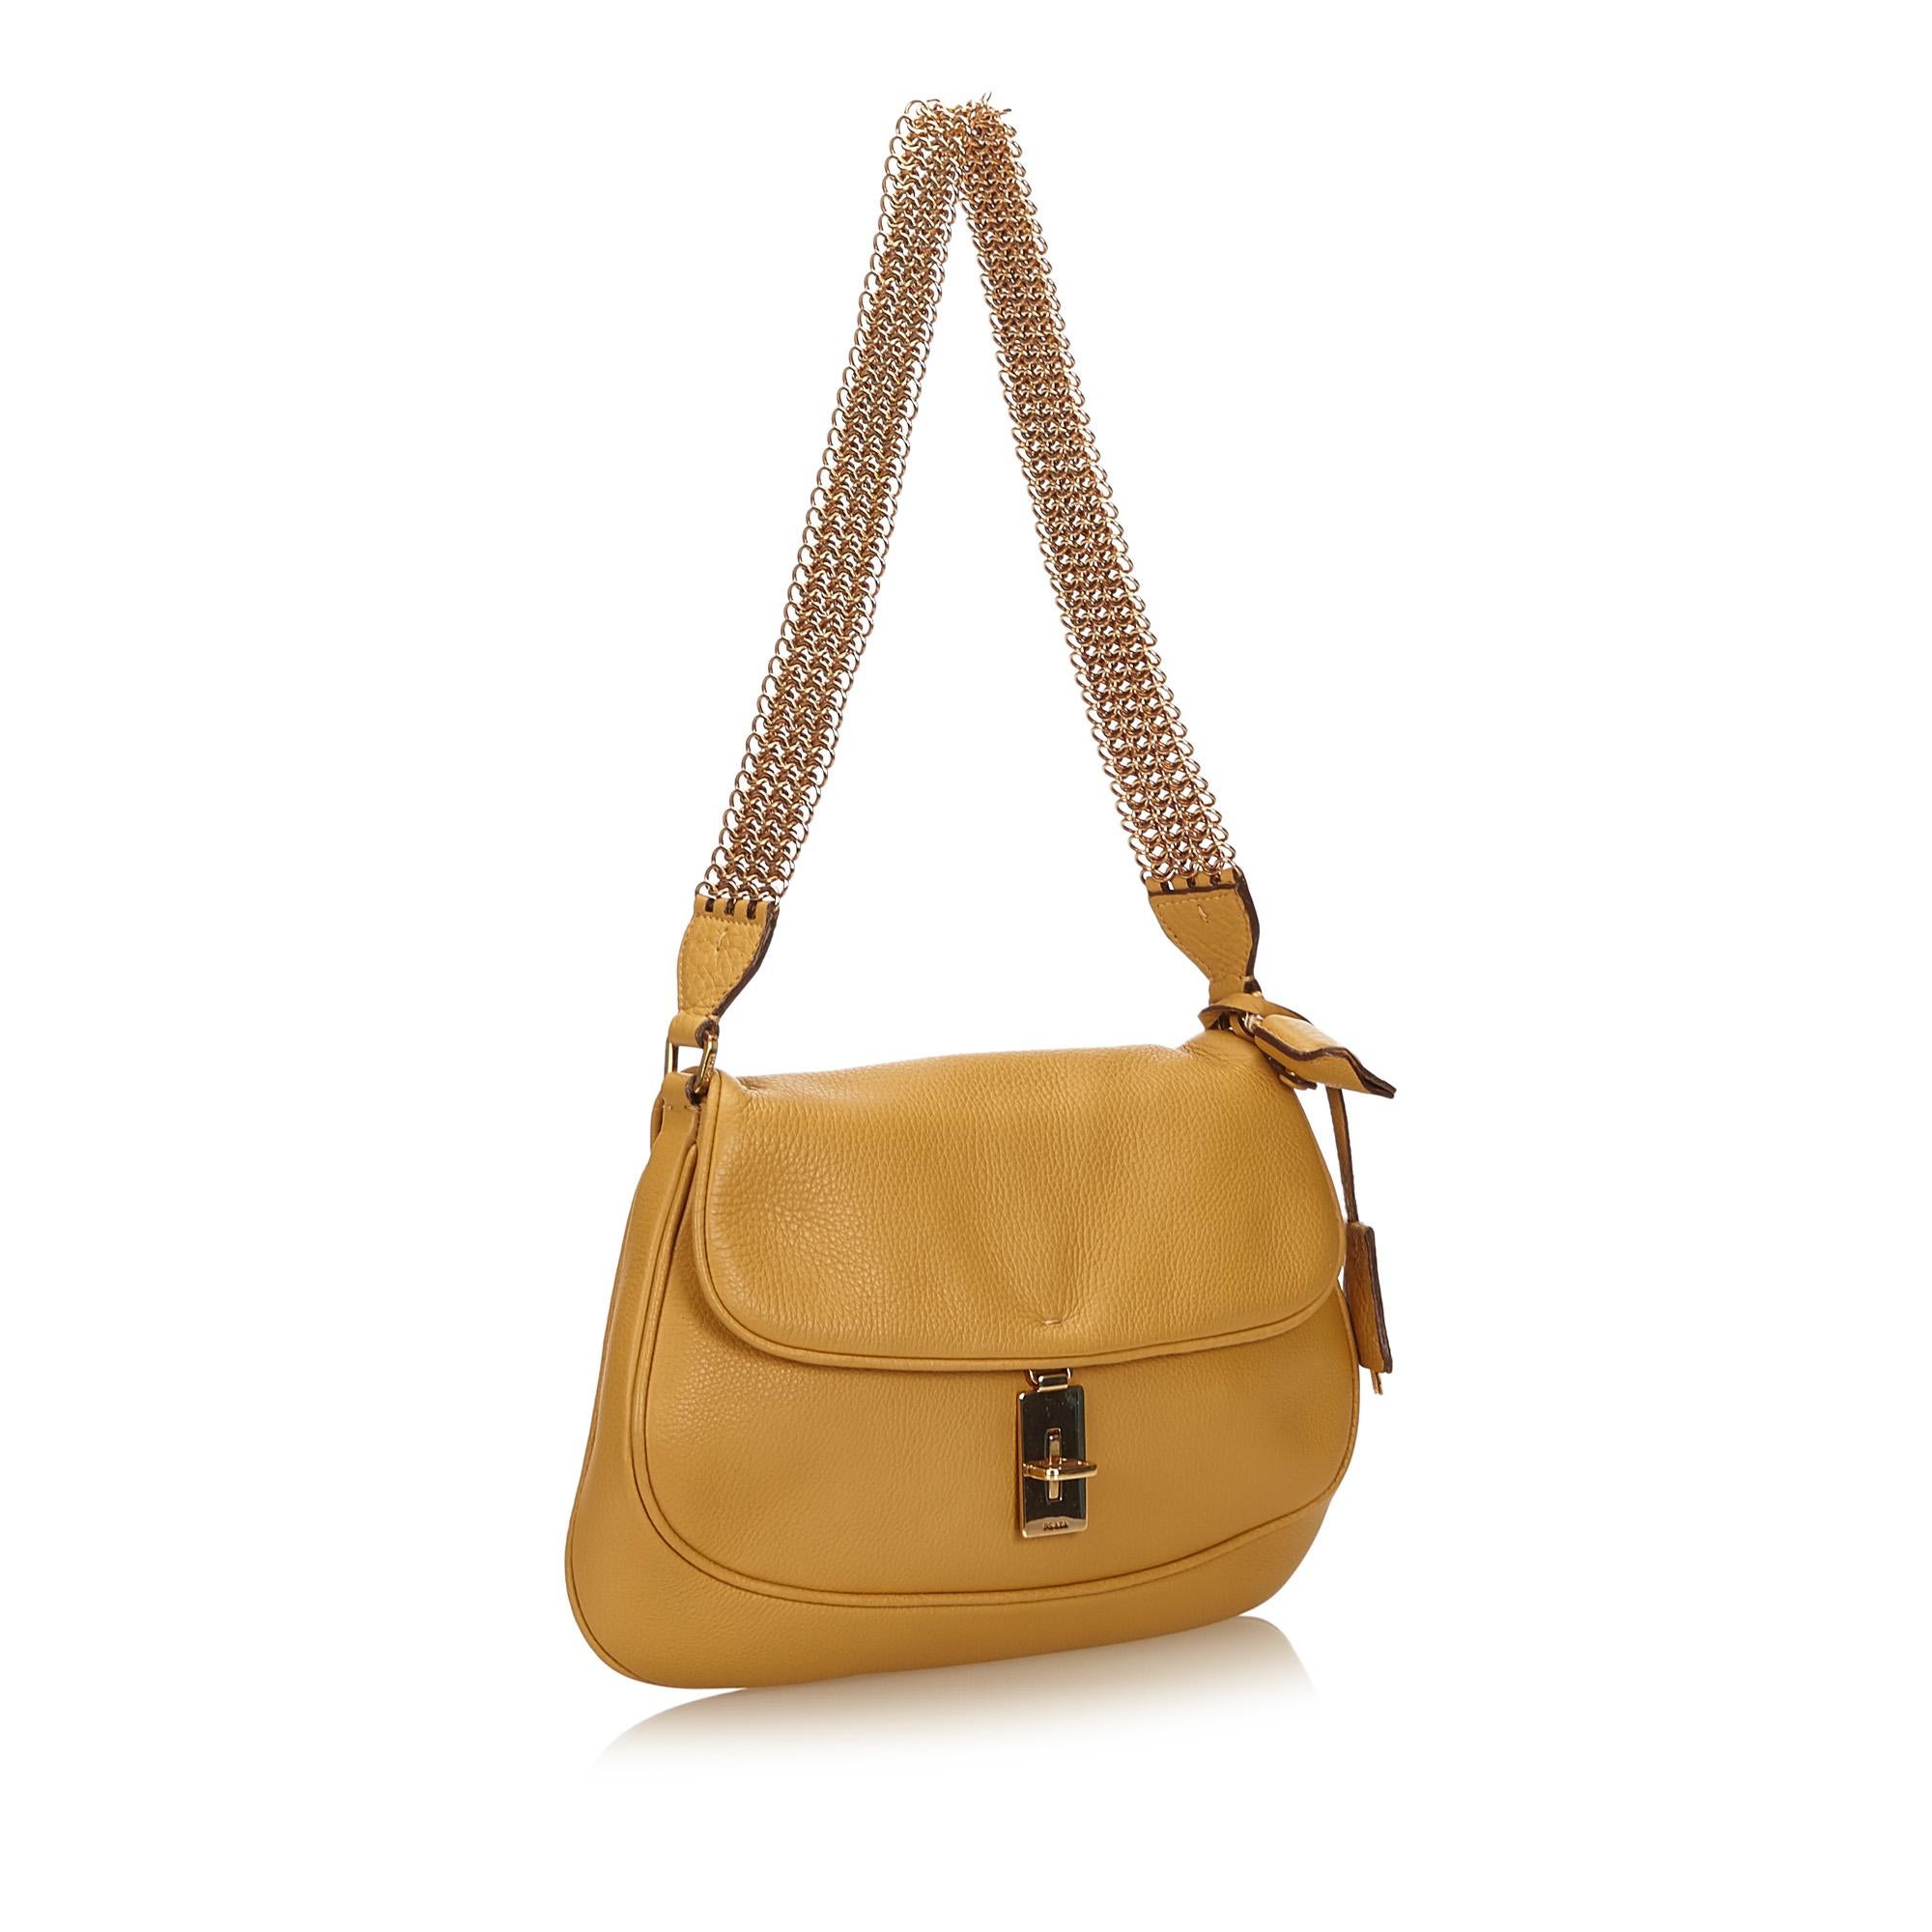 This shoulder bag features a leather body, chain straps, top flap with twist lock closure, exterior slip pocket, and interior zip pocket.

It carries a AB condition rating.

Dimensions: 
Length 16.00 cm
Width 26.00 cm
Depth 2.00 cm
Shoulder Drop